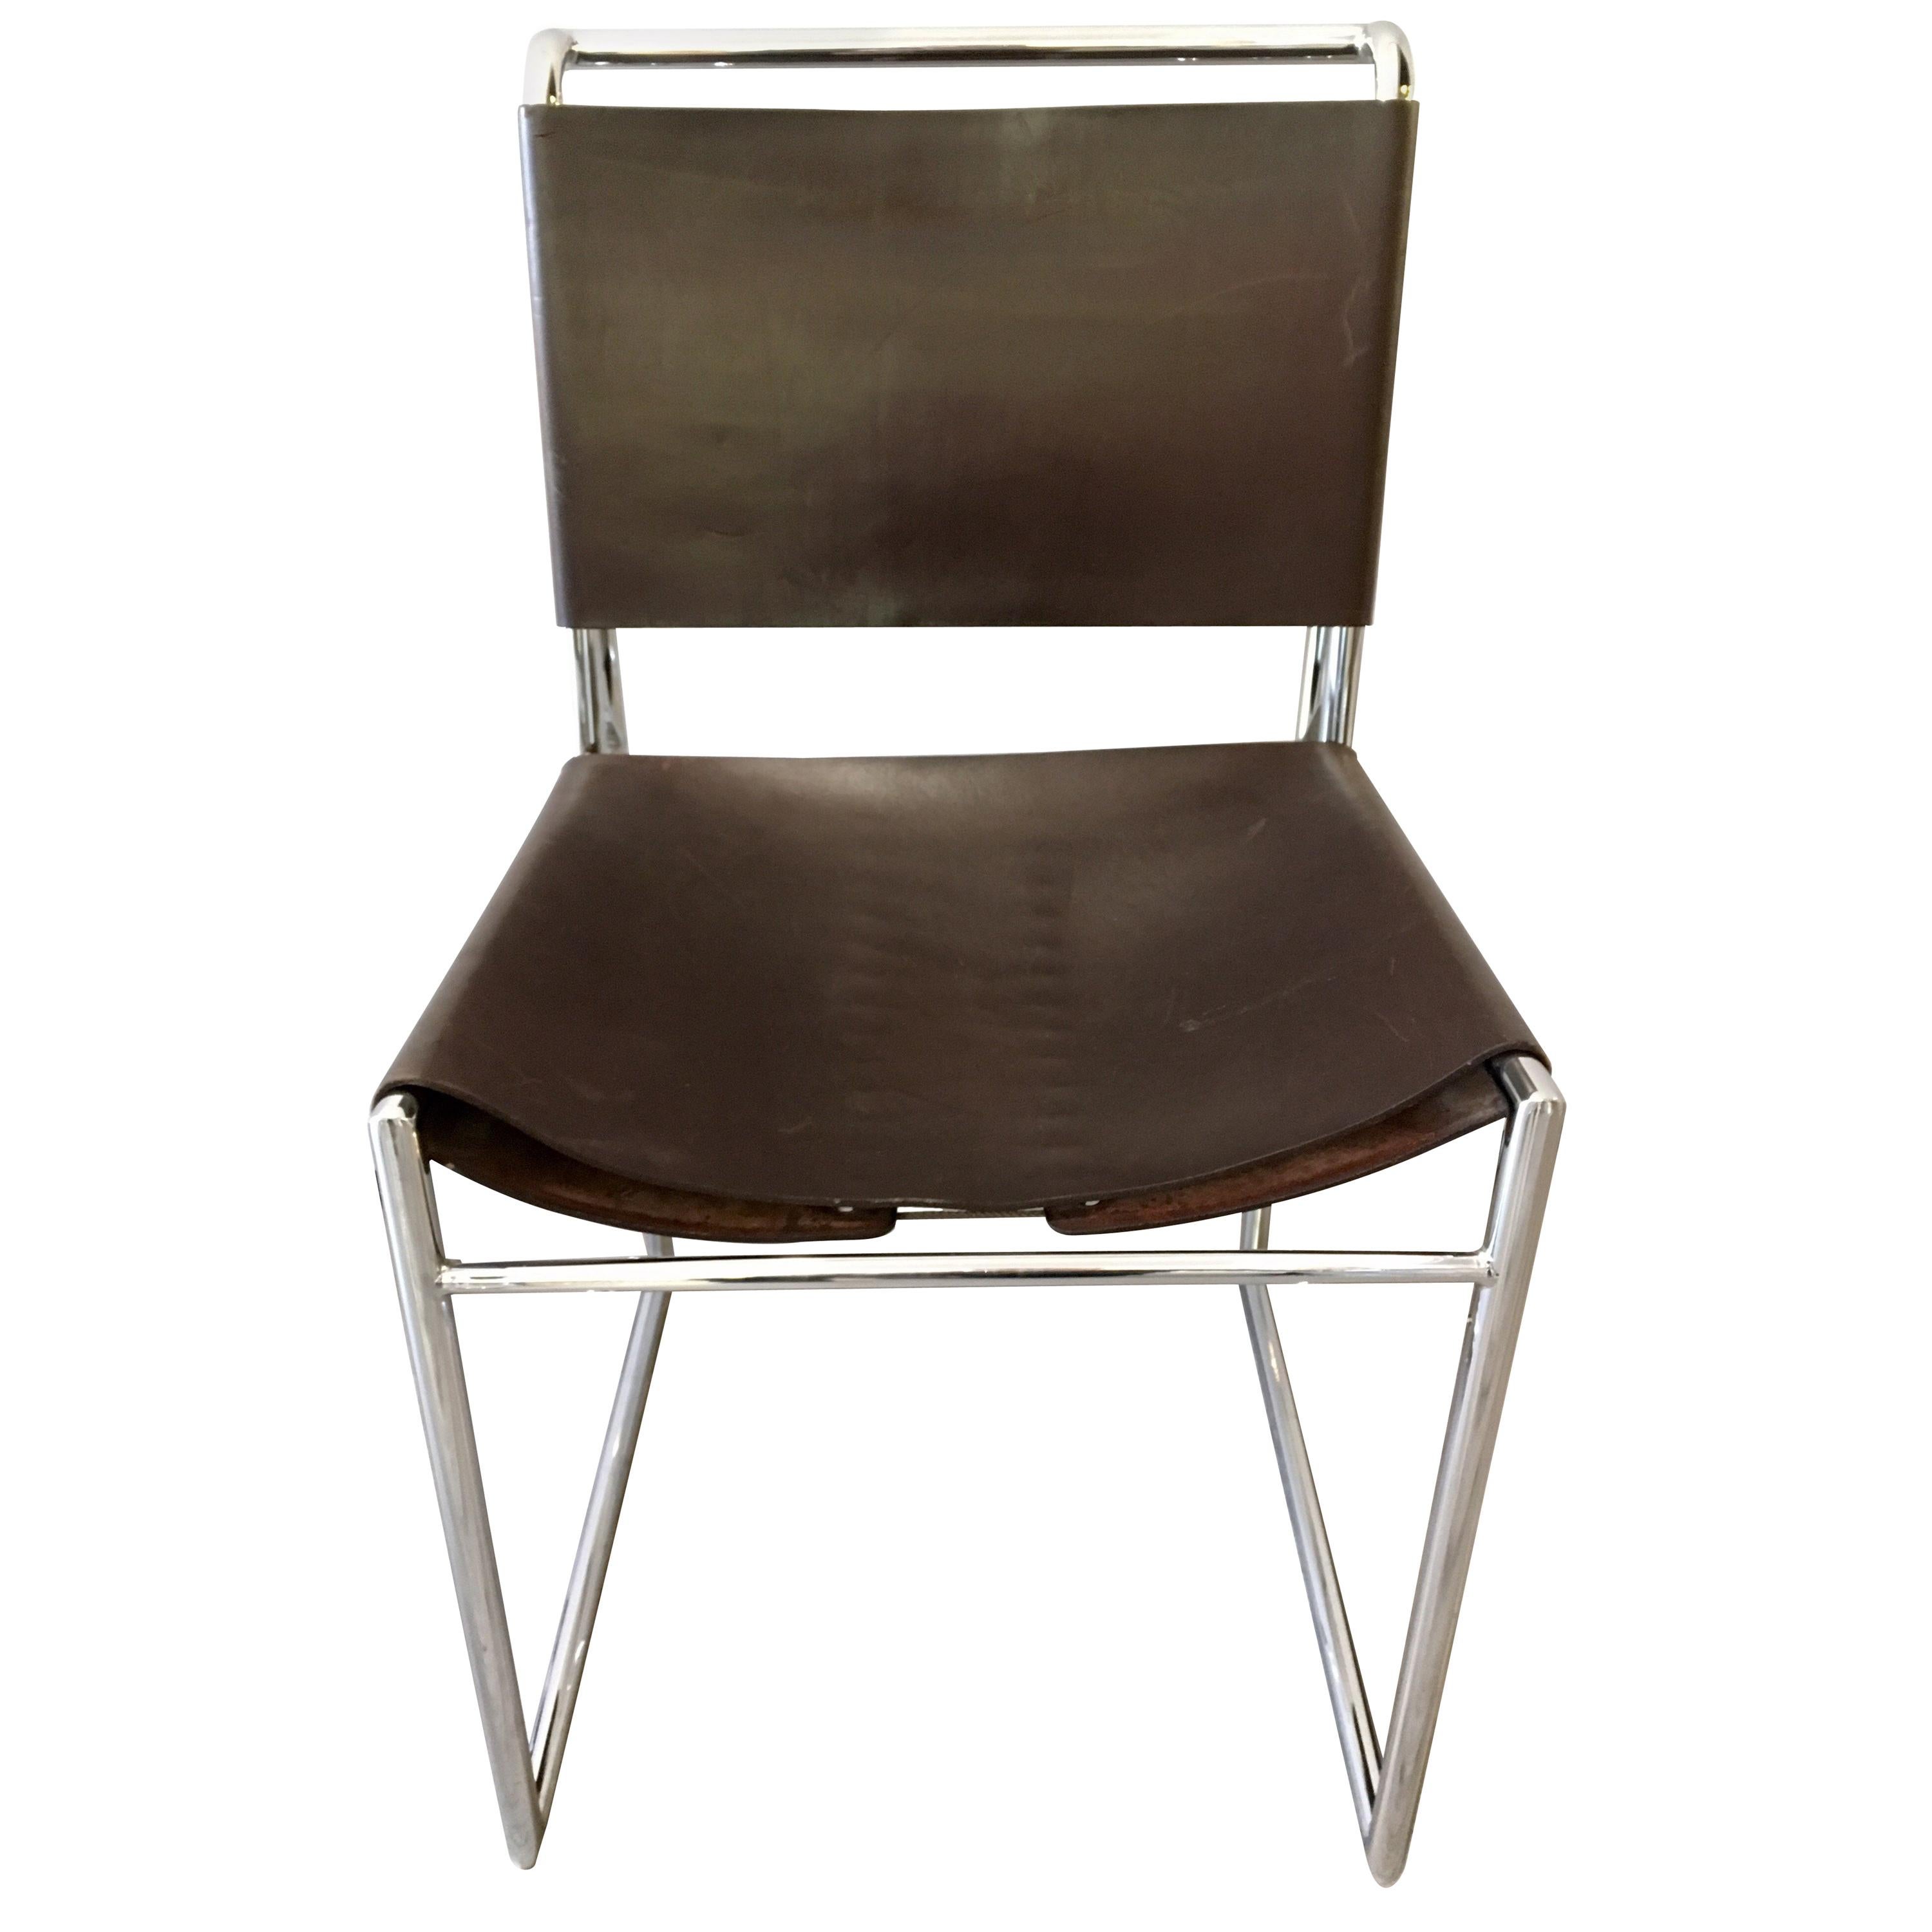 Set of fifty matching Marcel Breuer B40 dining chairs. These chairs feature heavy chrome, dark brown leather and the coveted leather corset system at backrest and seat bottom. We have several of these chairs which come out of one of the country's